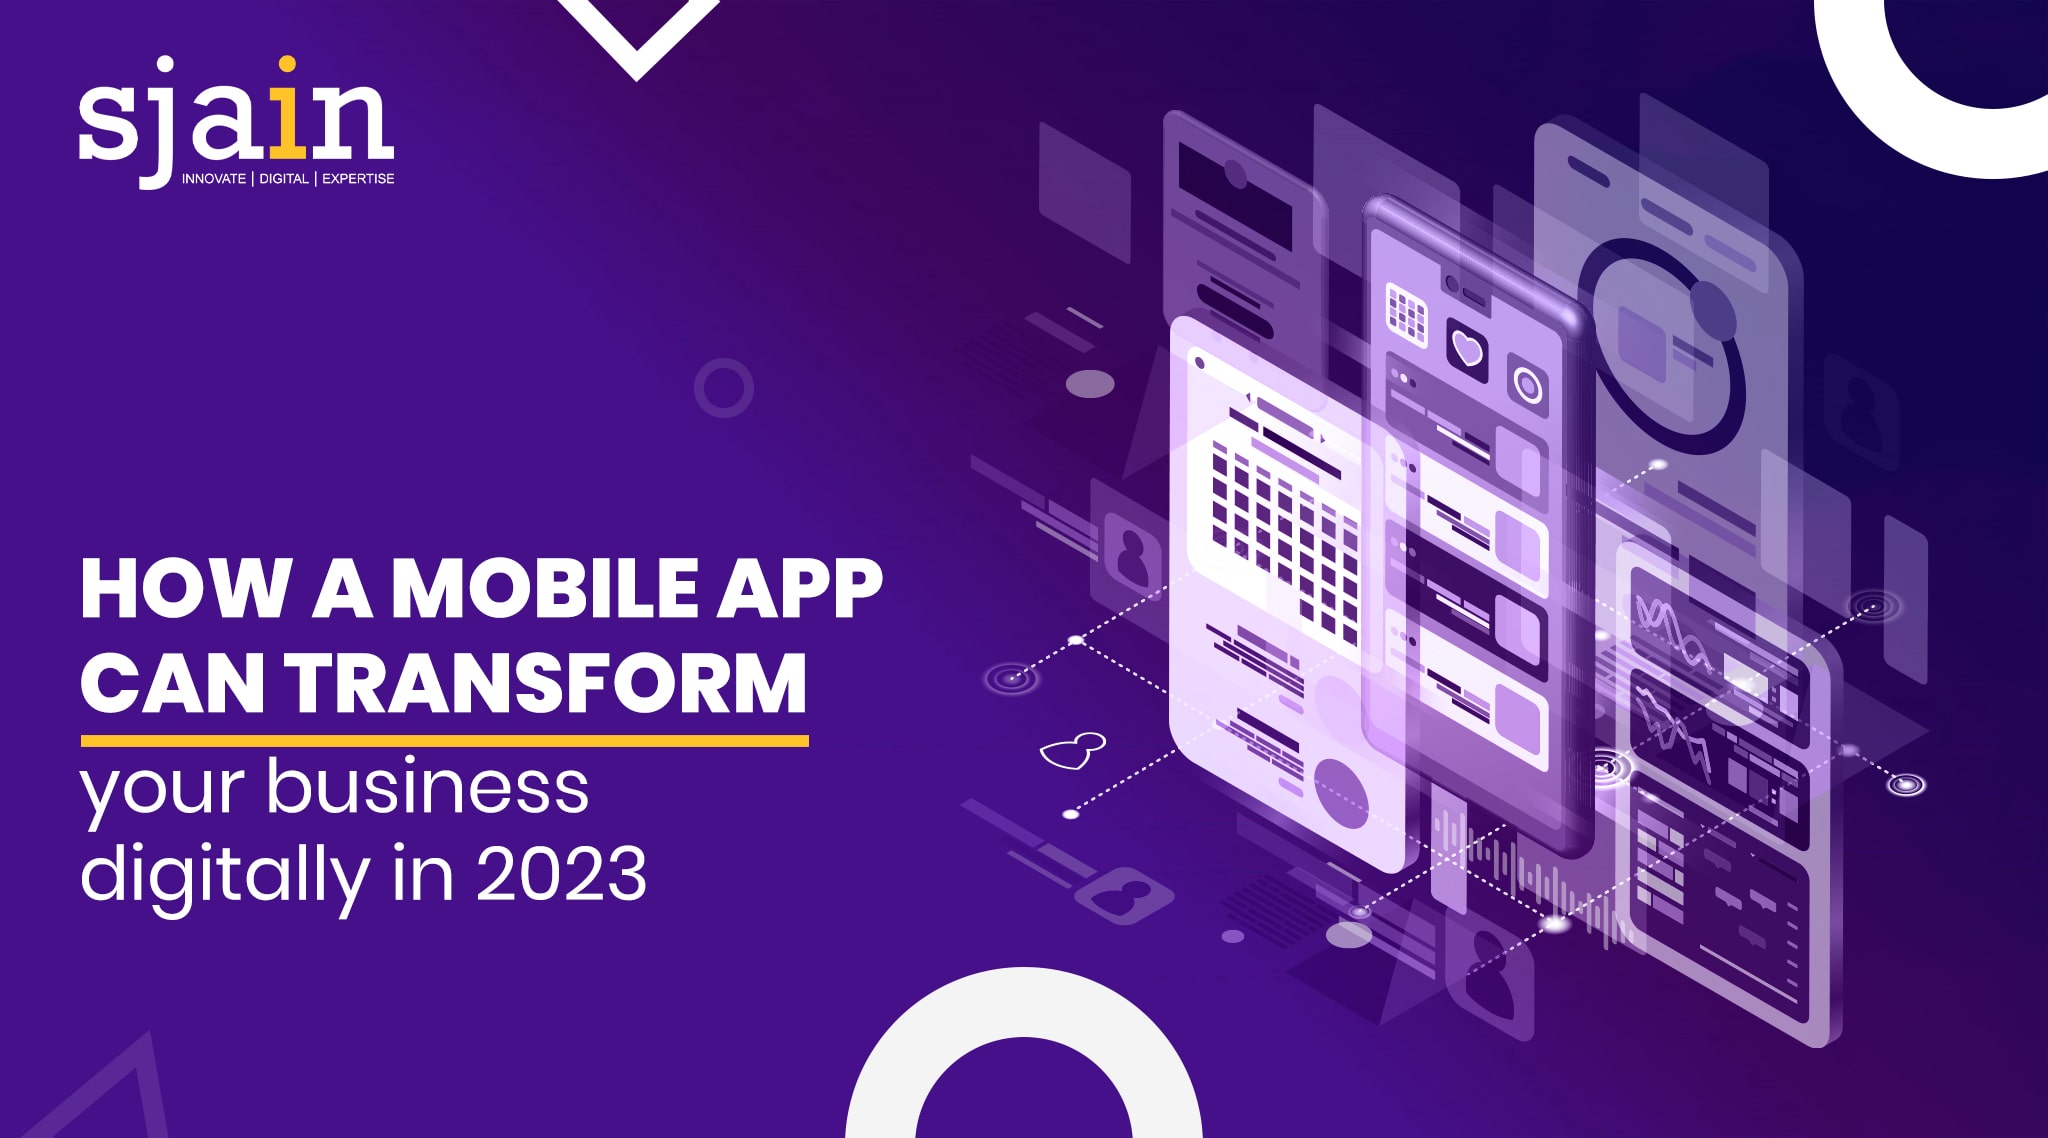 How a Mobile App can Transform your Business Digitally in 2023